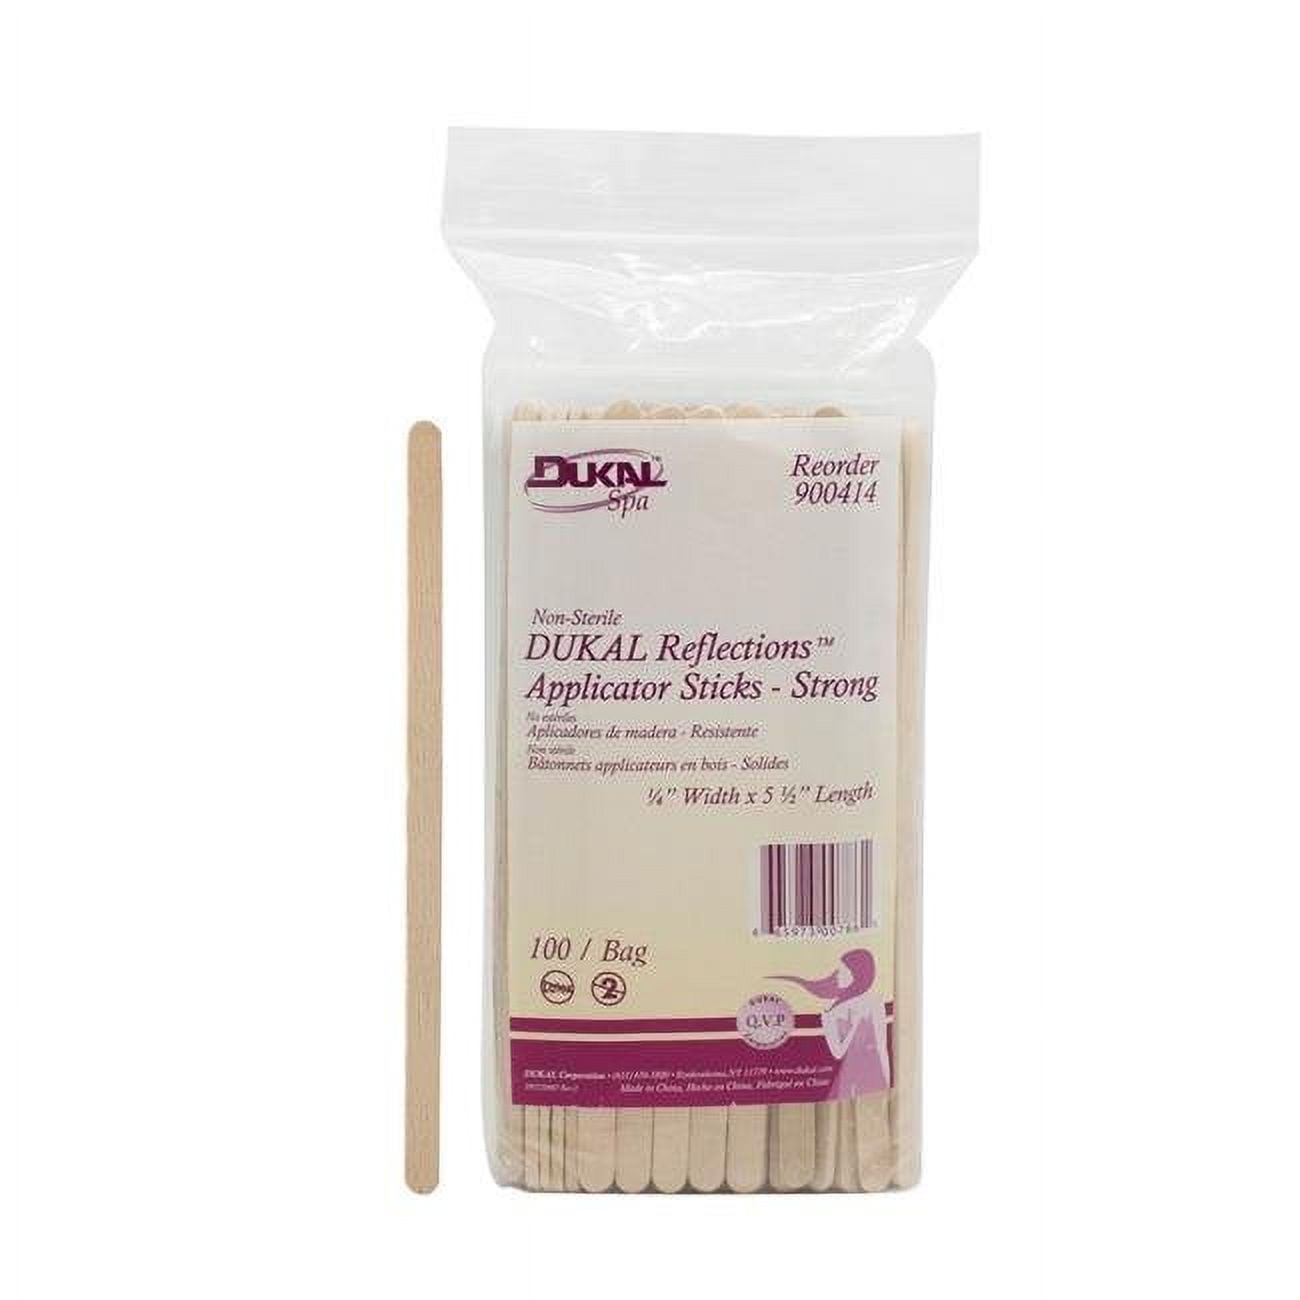 Picture of Dukal 900414 0.125 x 5.5 in. Reflections Wax & Body Strong Treatment Applicators